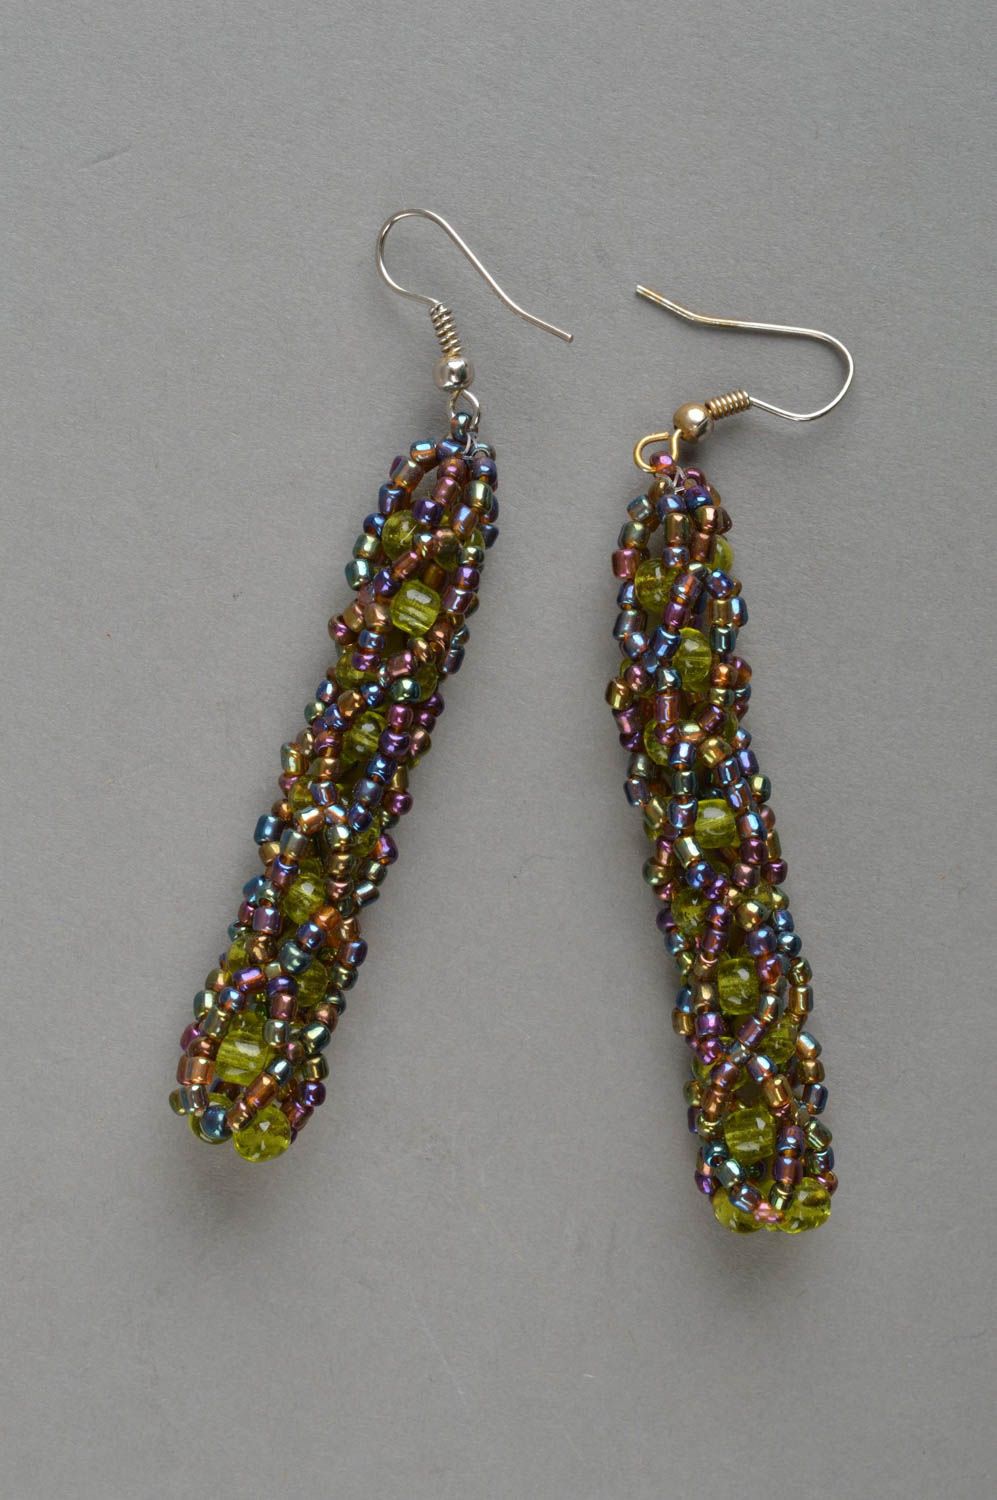 Unusual handcrafted beaded earrings jewelry designs fashion accessories photo 2